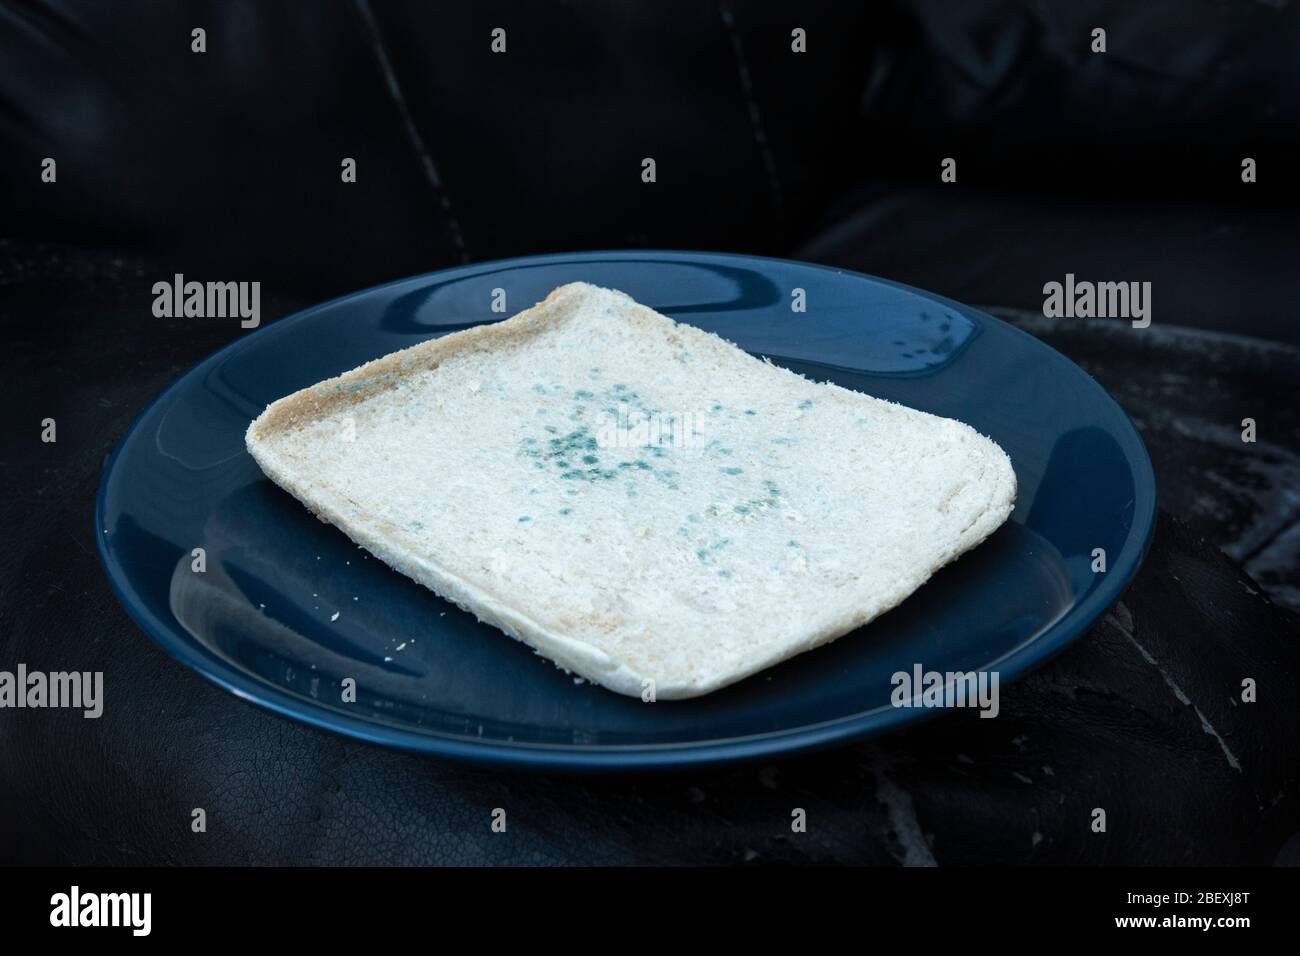 Slice of white bread with green mould growing on it. Stock Photo